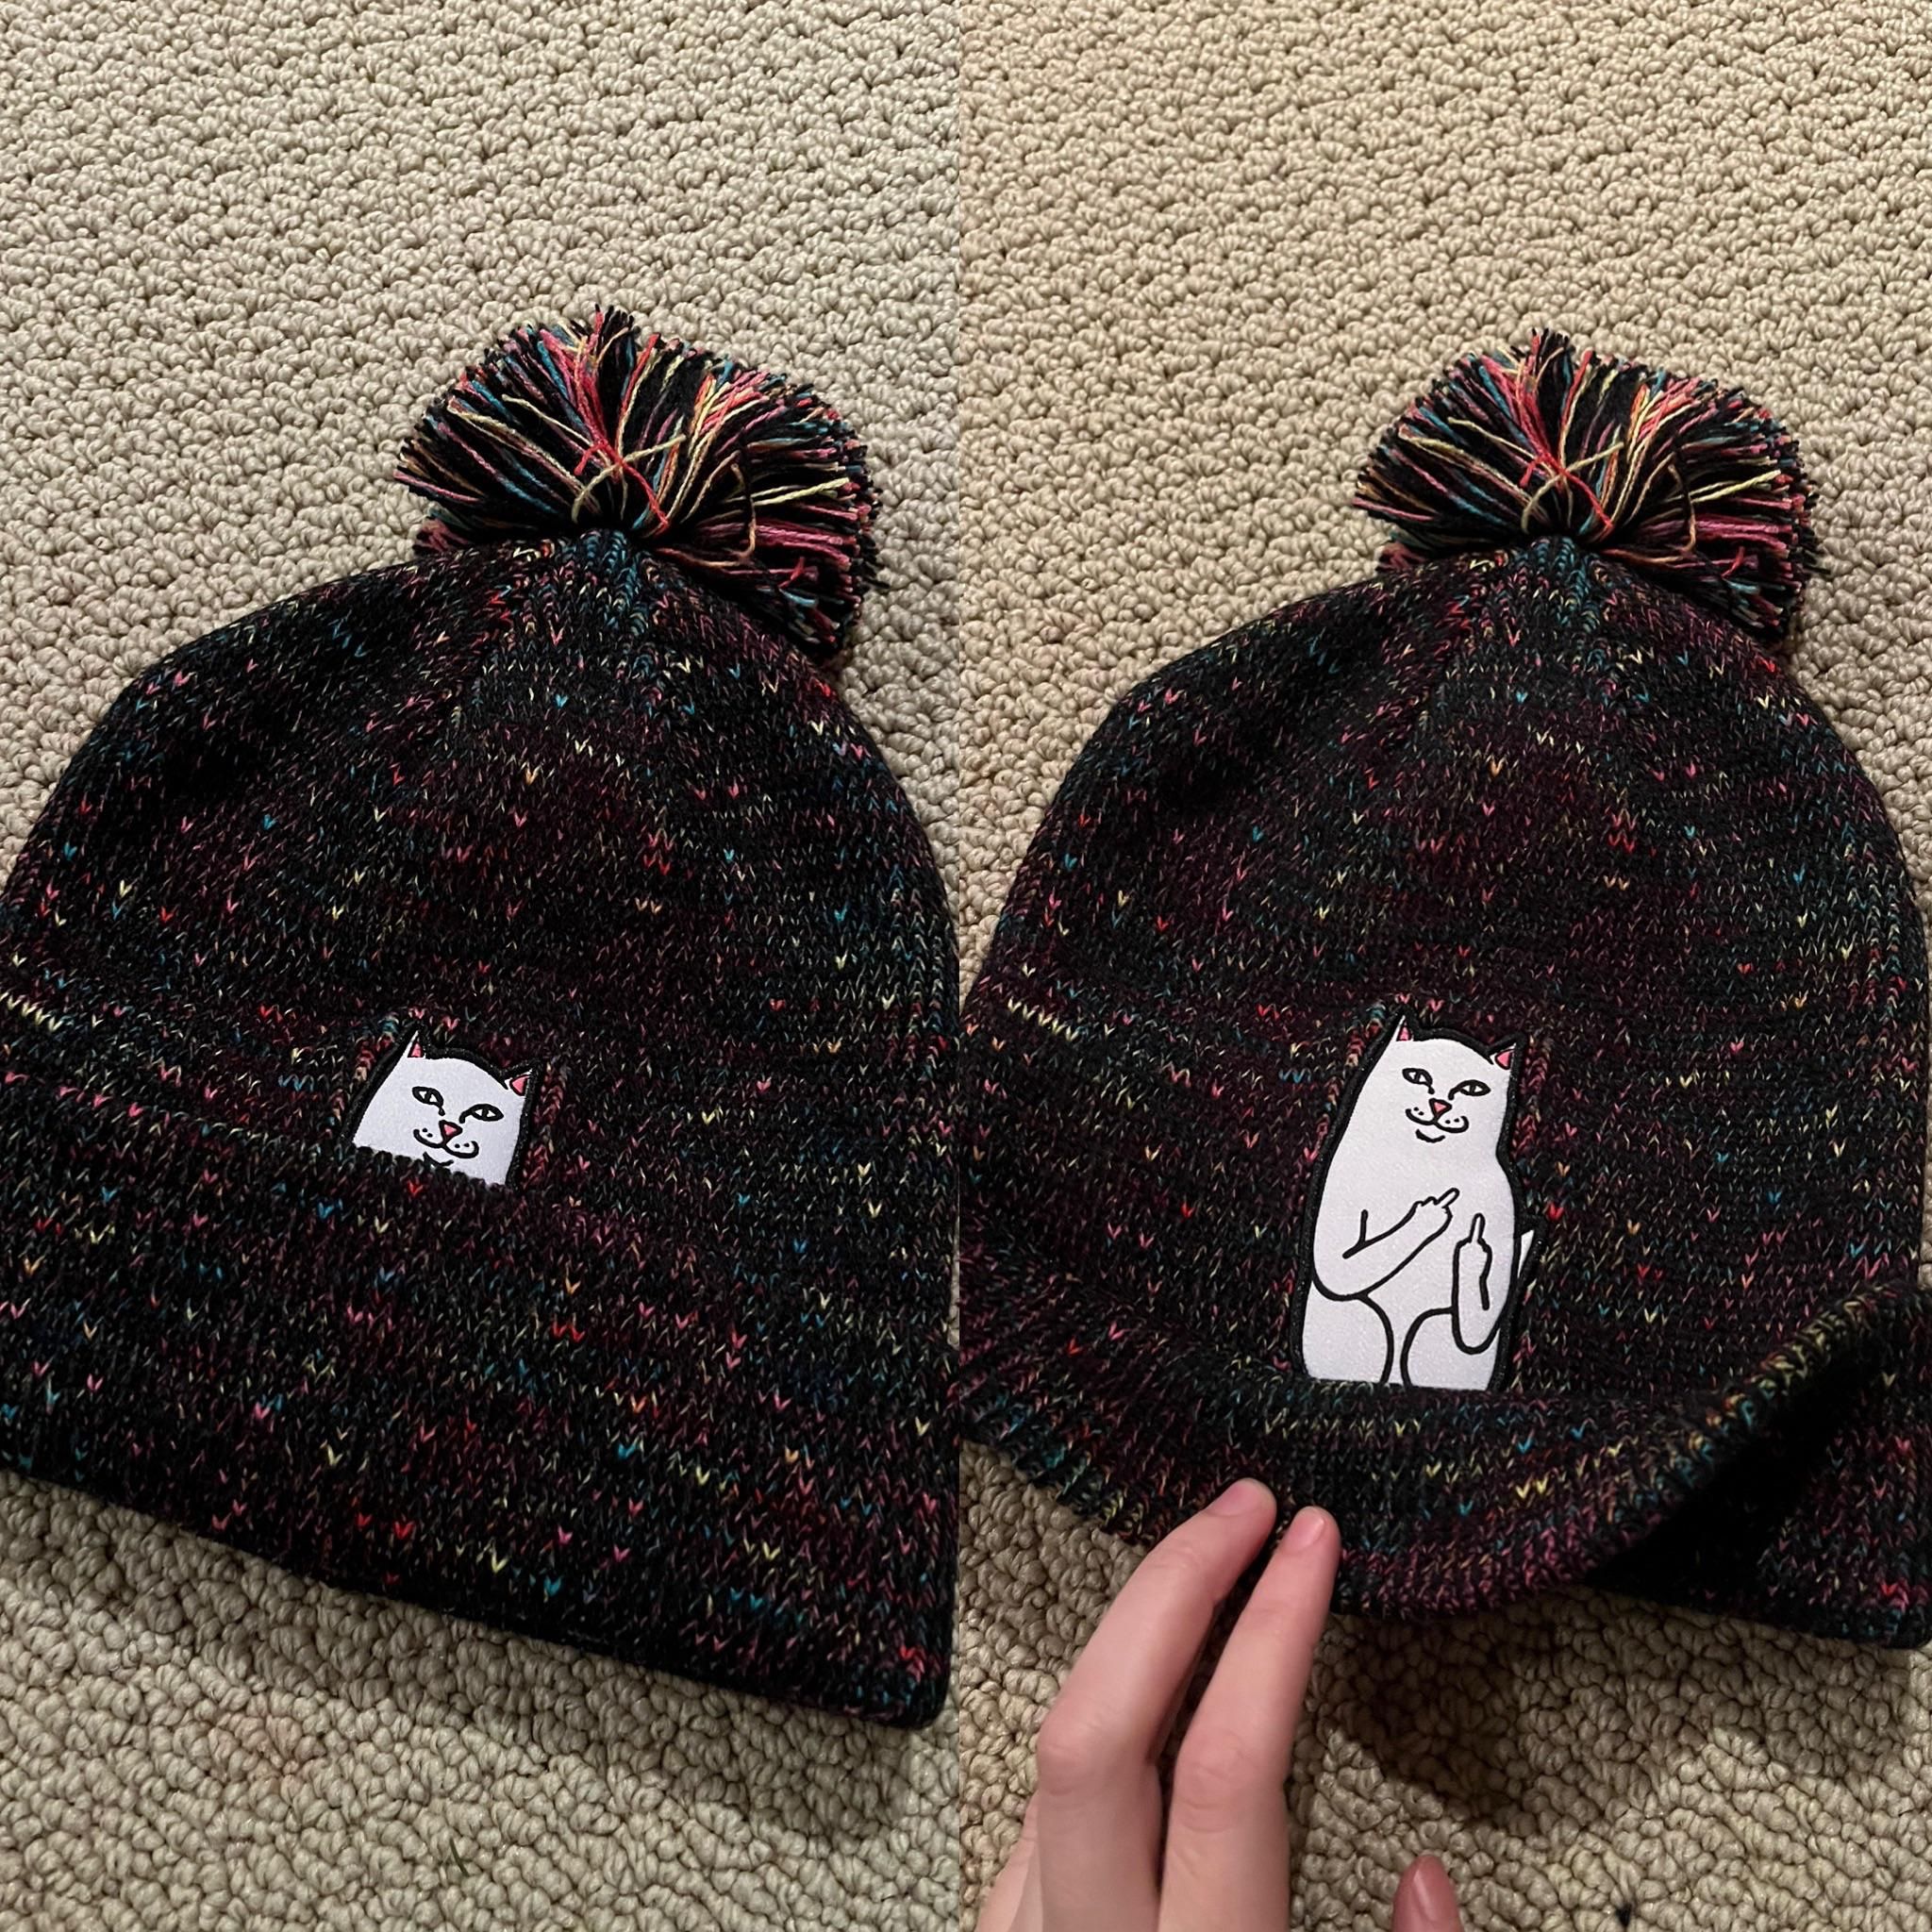 My mom bought this “cute little kitty hat” for me without looking at all of the photos…